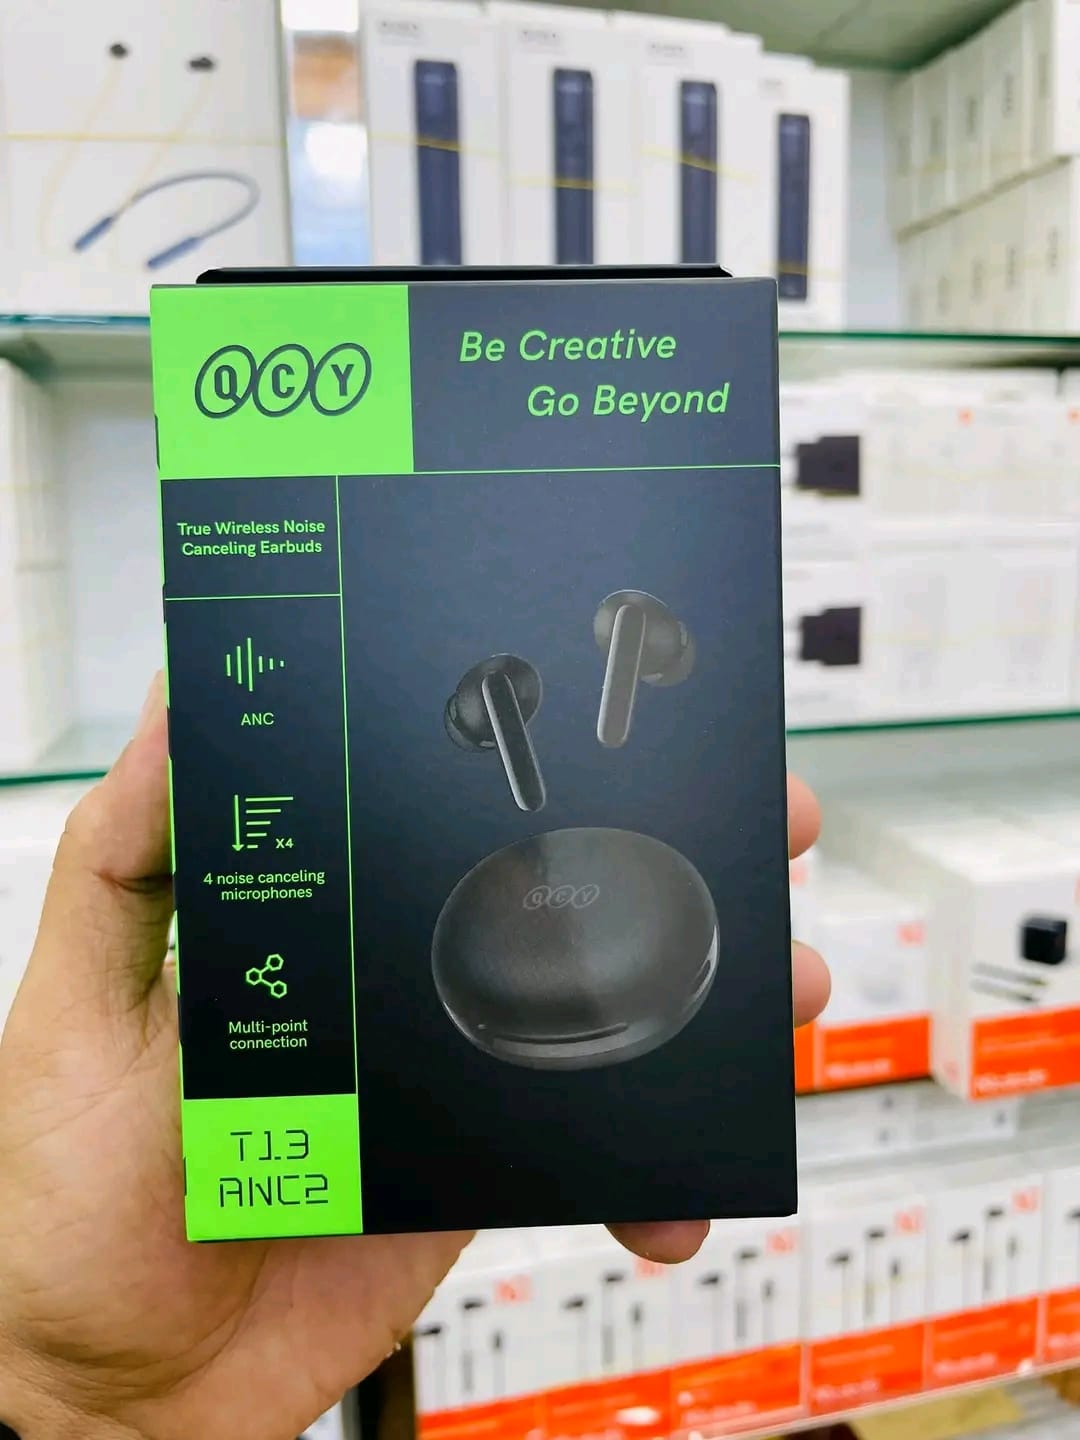 QCY T13 ANC 2 Truly Wireless Earbuds – Black Color – Dropshop 2.0